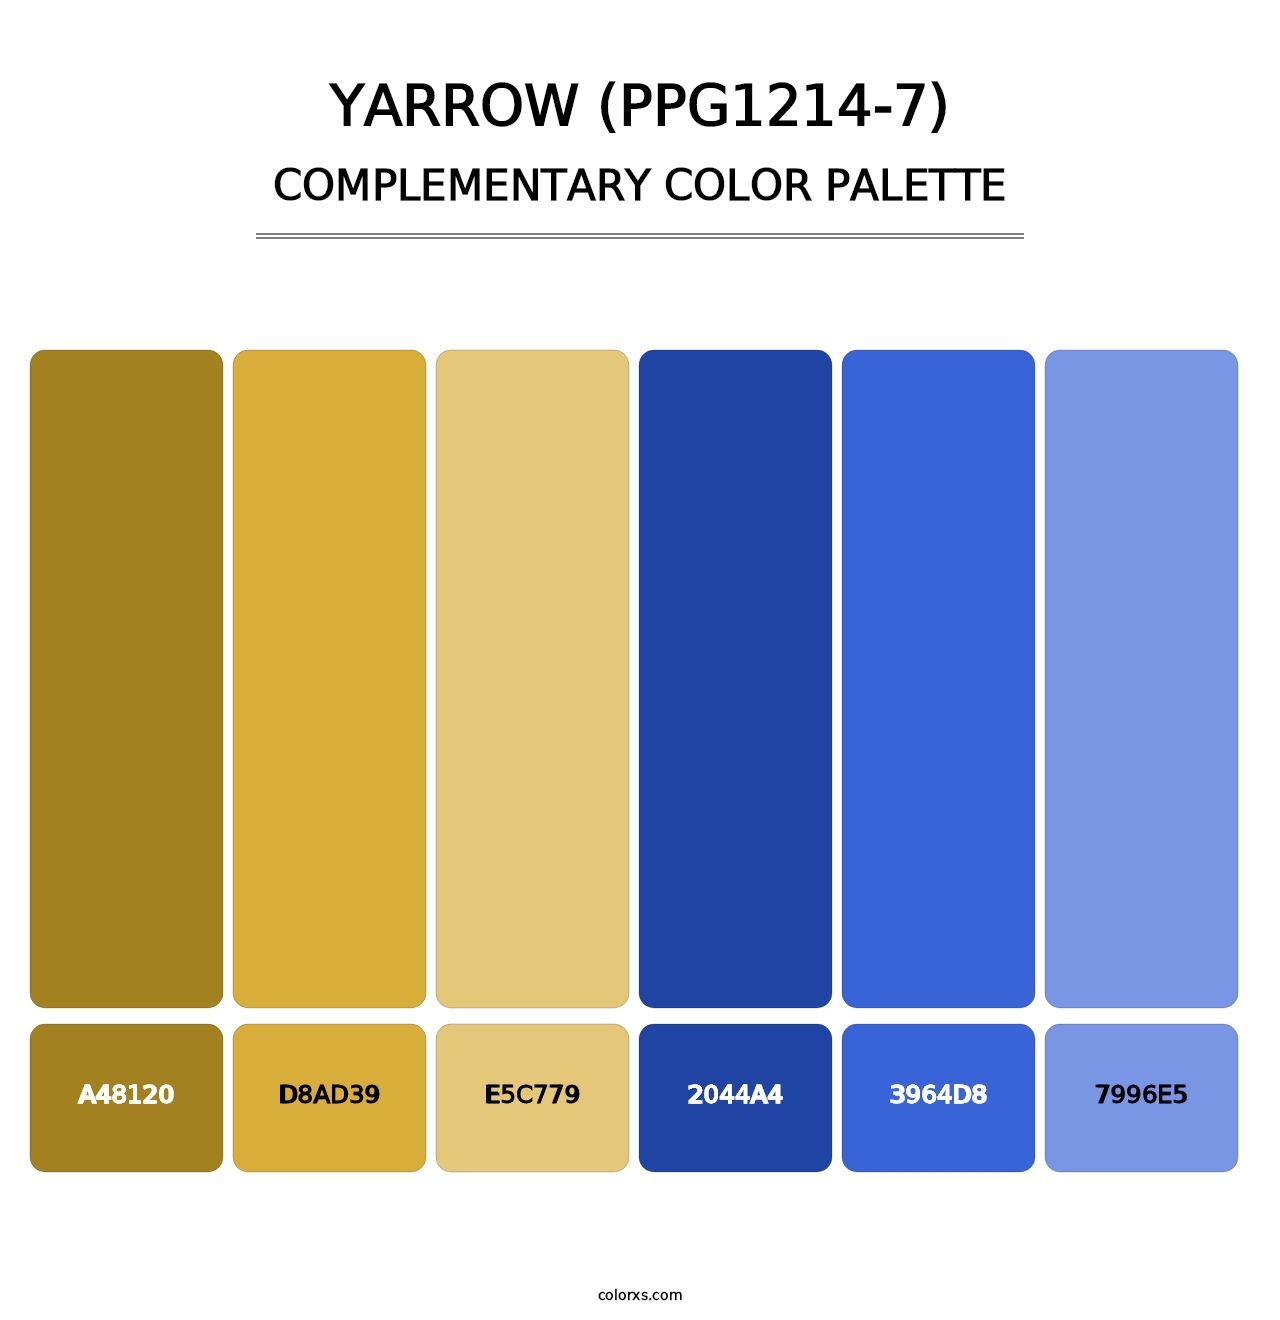 Yarrow (PPG1214-7) - Complementary Color Palette